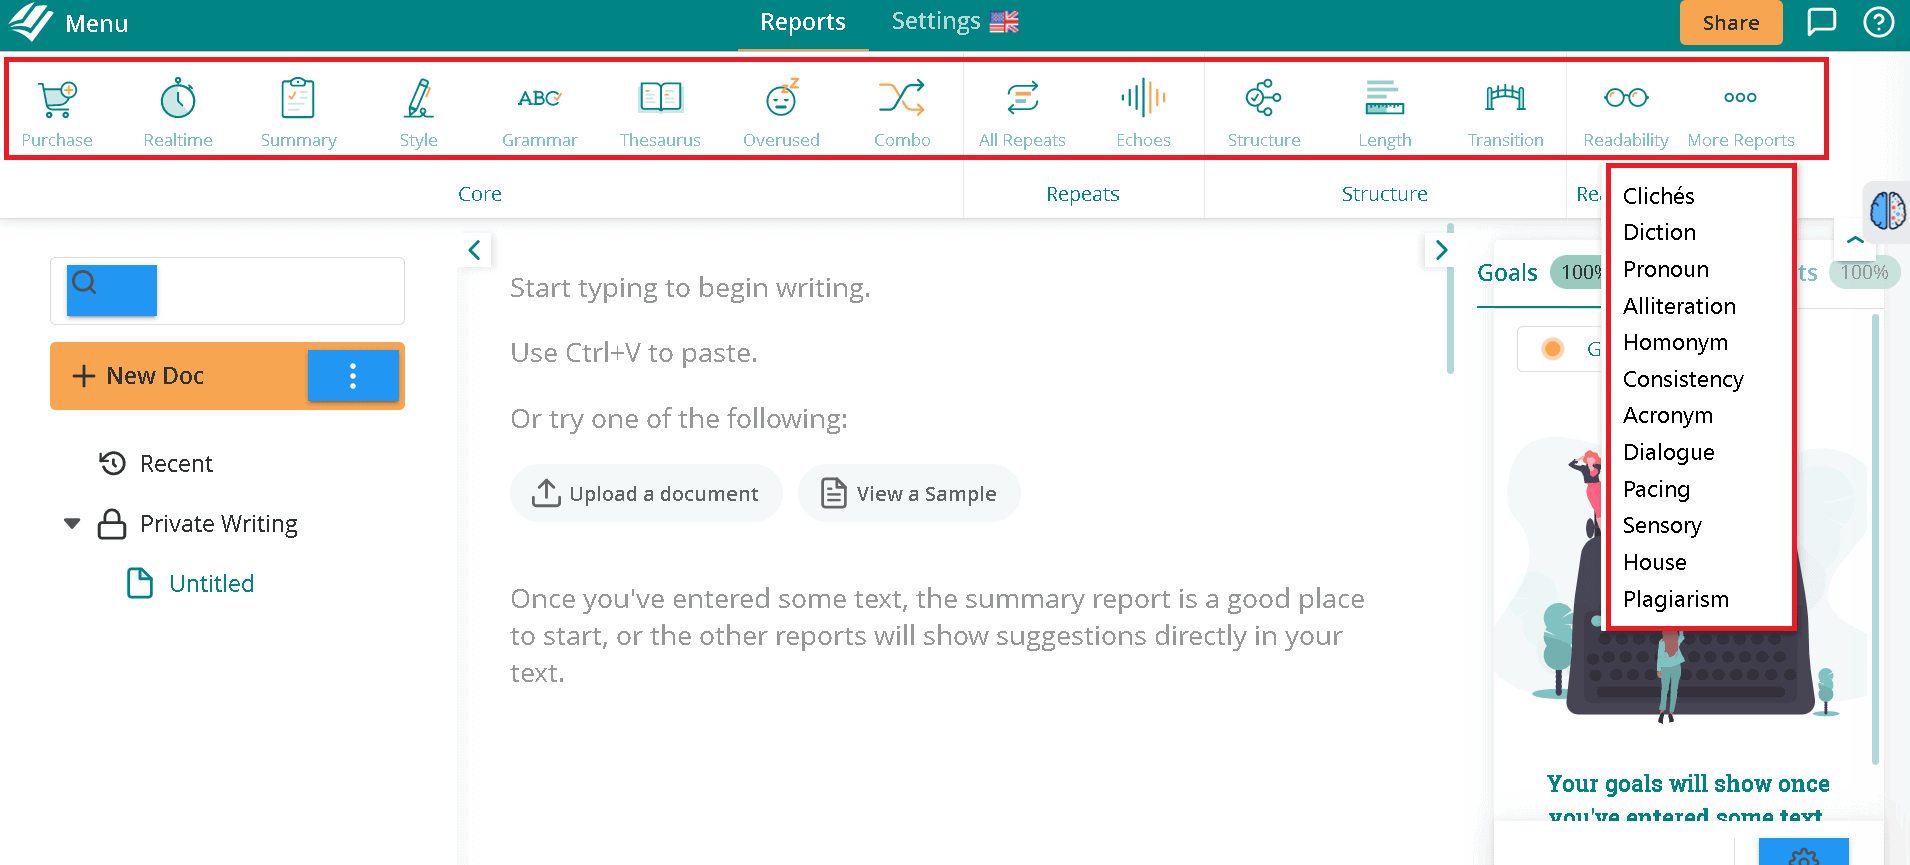 ProWritingAid is more than a grammar checker- many features available